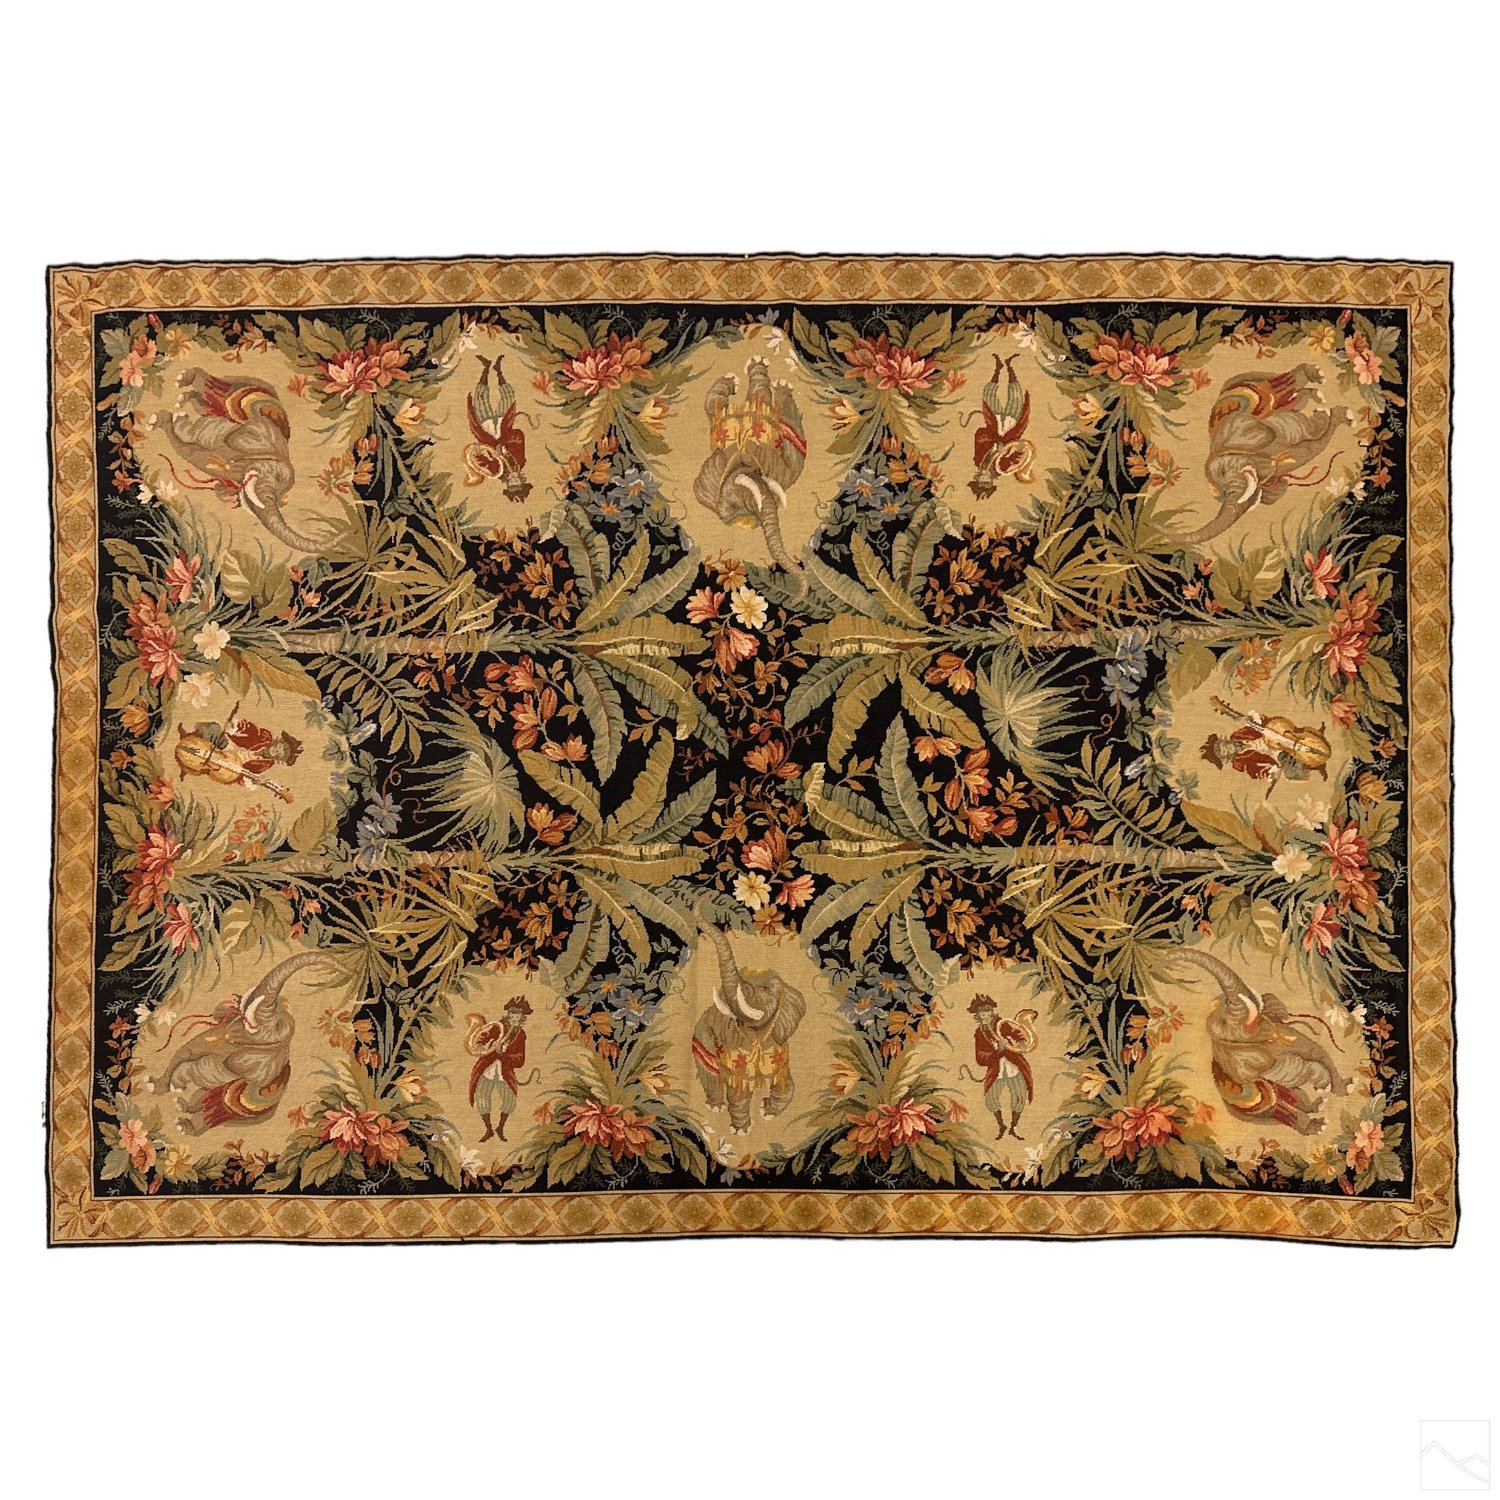 Image of Vintage Oriental Wool Area Rug by Rex & Rex inspired by the Rococo Singerie Genre